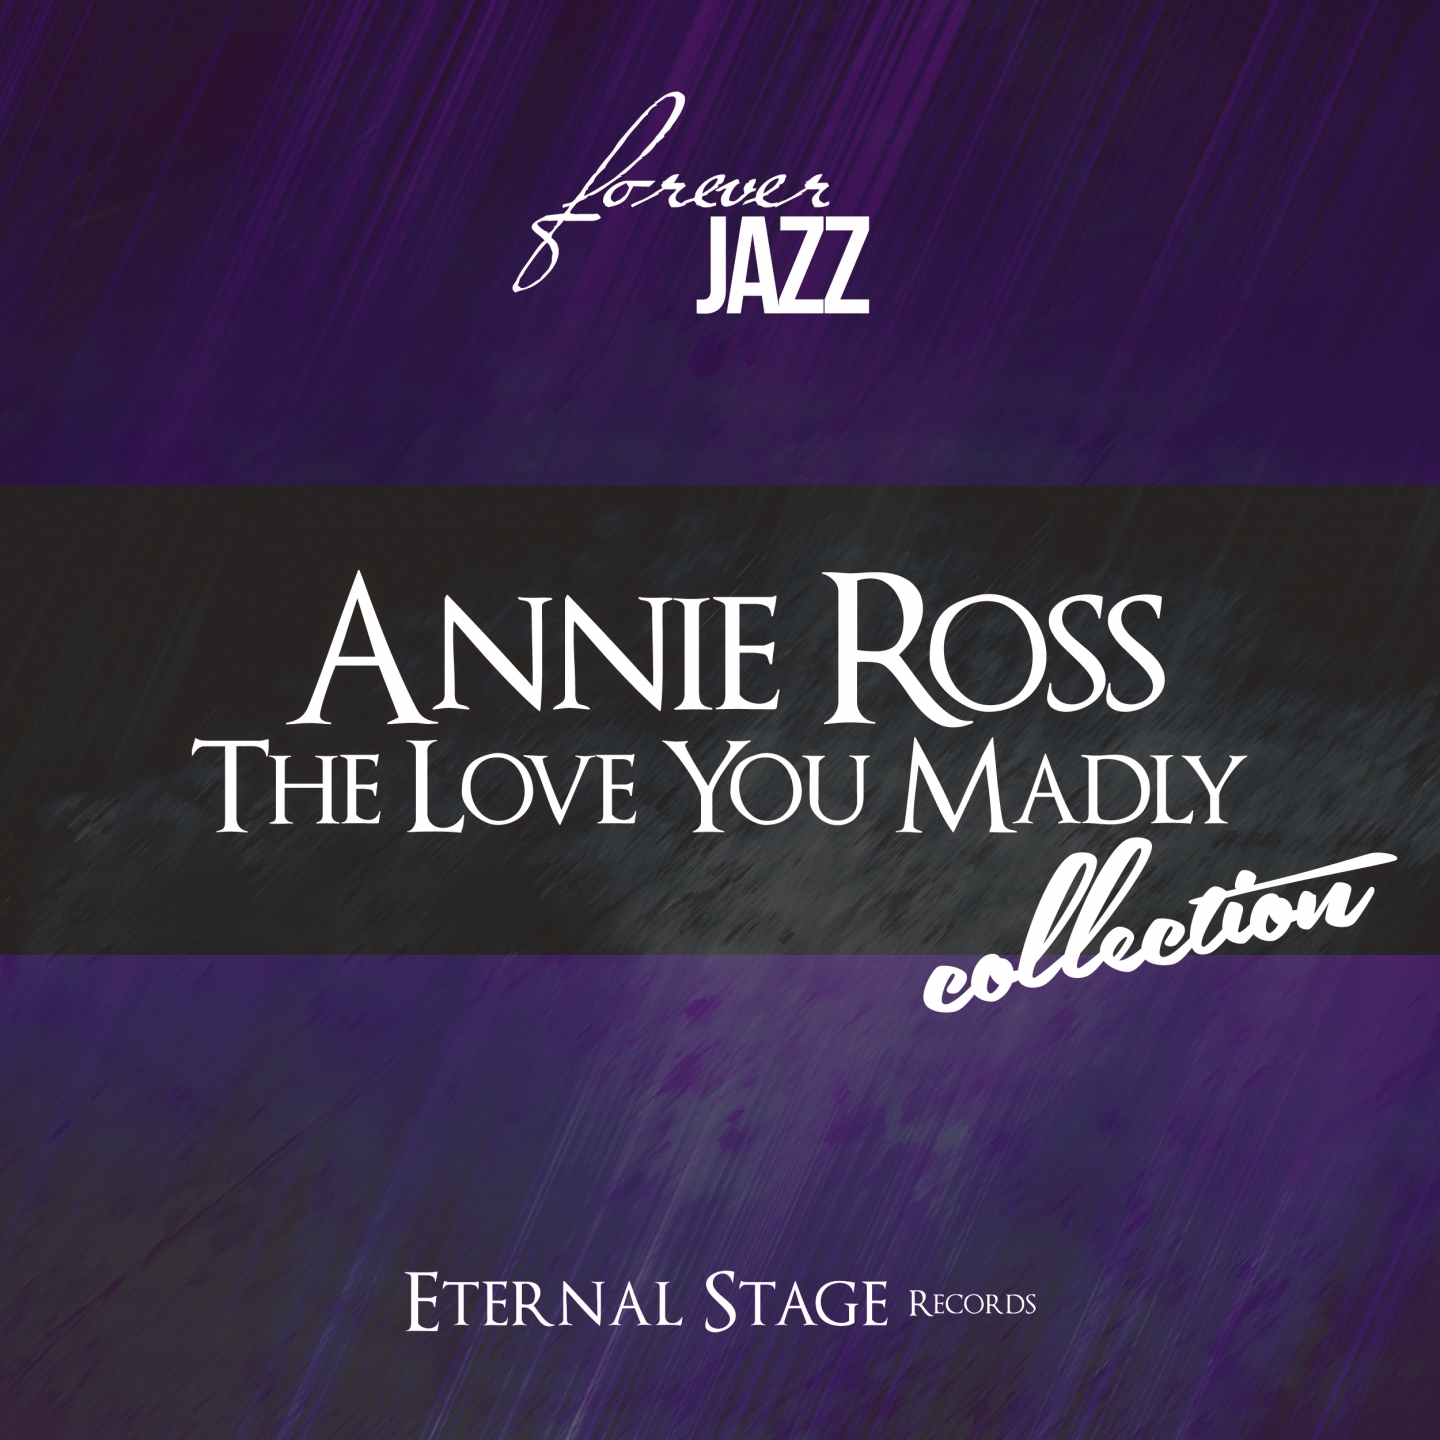 The Love You Madly Collection (Forever Jazz)